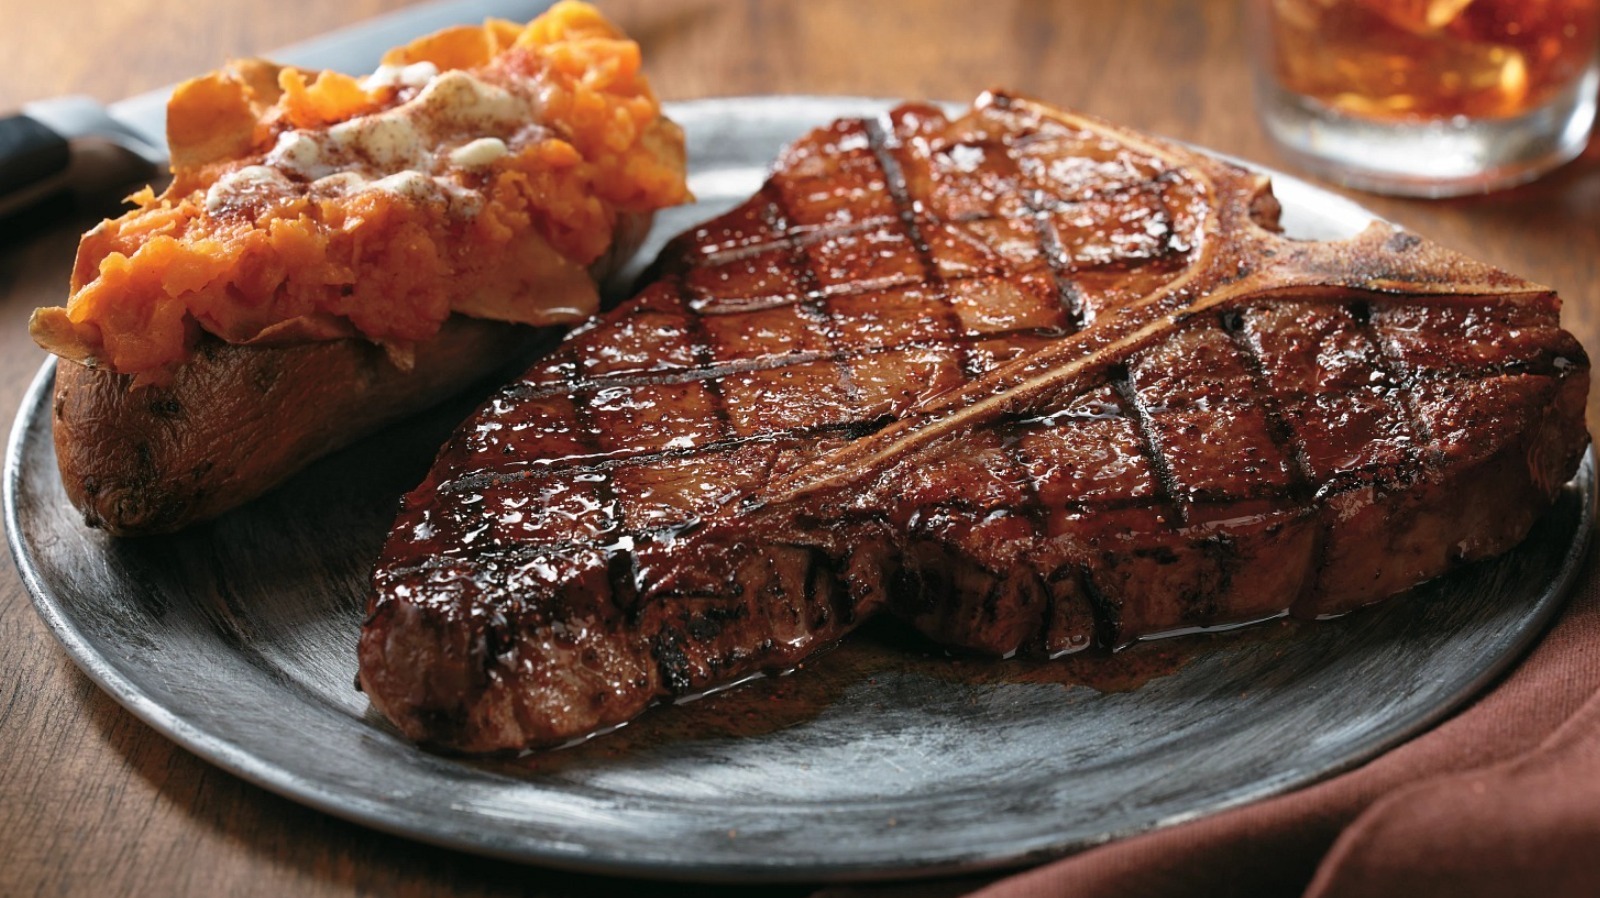 https://www.mashed.com/img/gallery/why-longhorn-steakhouse-is-petitioning-for-a-new-emoji/l-intro-1660929091.jpg